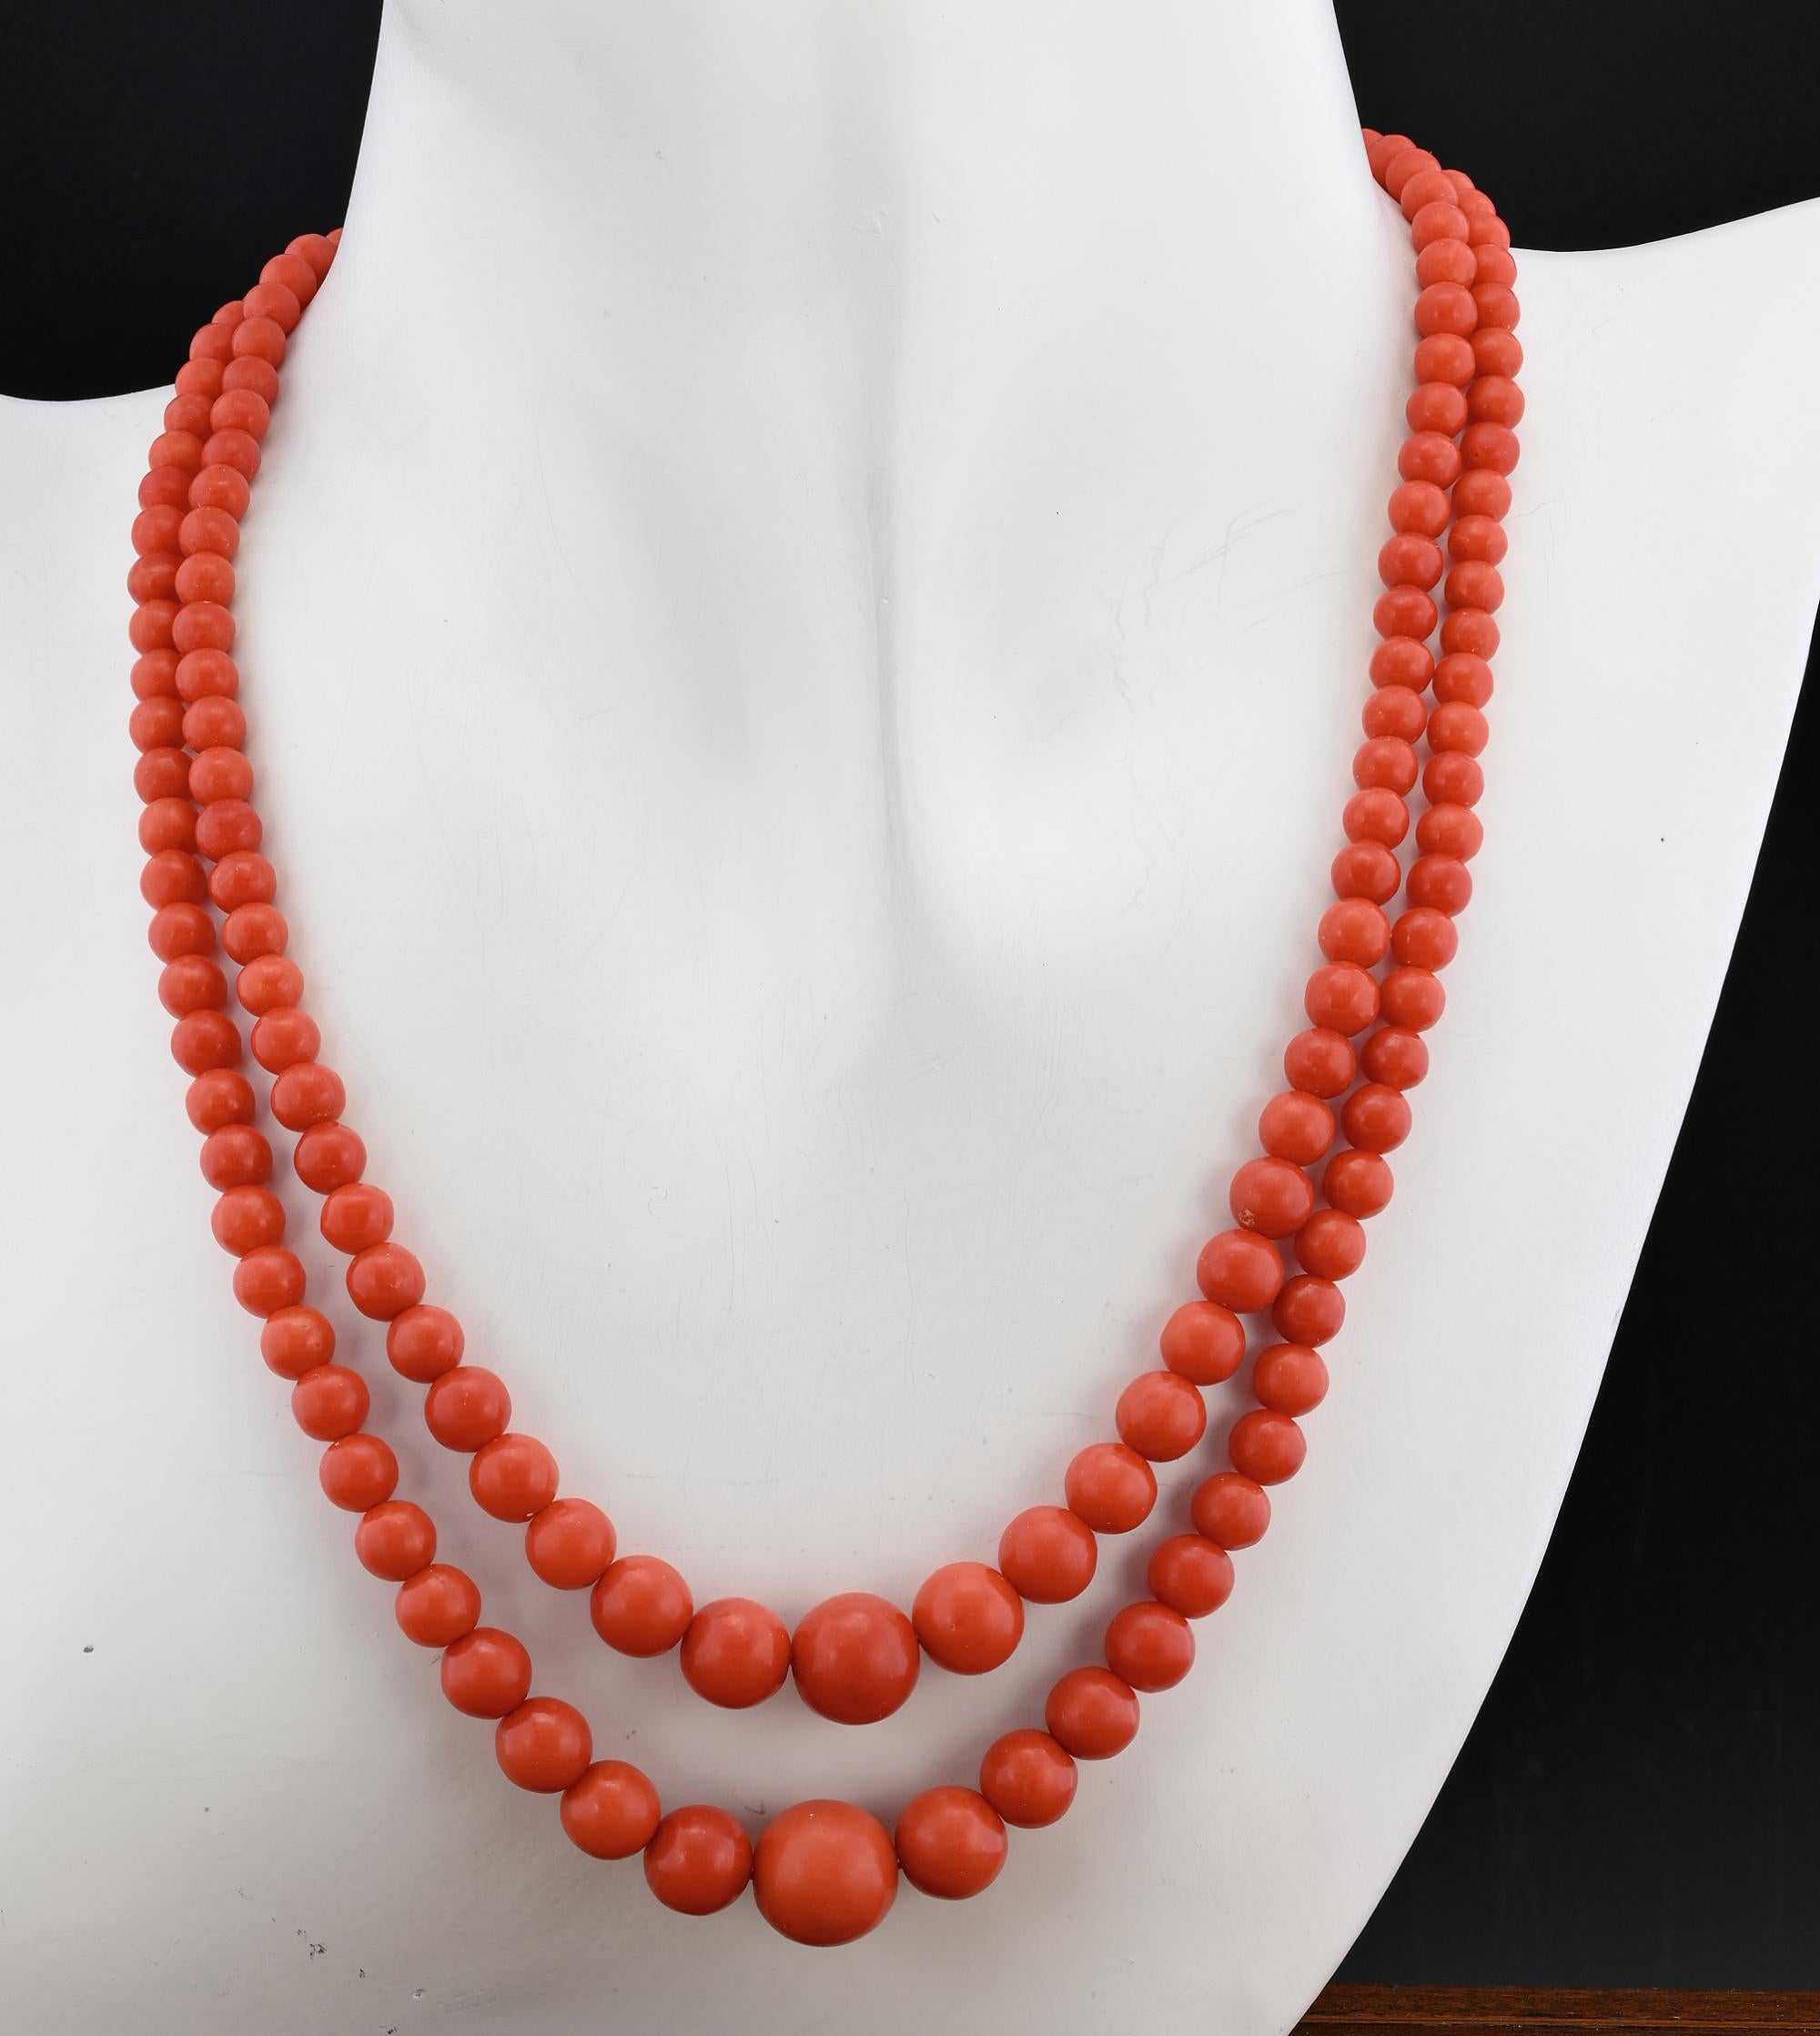 Charming antique Art Deco period double strand Coral necklace 1920 circa
Italian Mediterranean origin
Comprising two strands of natural untreated – no wax - not dyed Coral of stunning Red color, graduated beads ranging in sizes from 4 mm to 11 mm